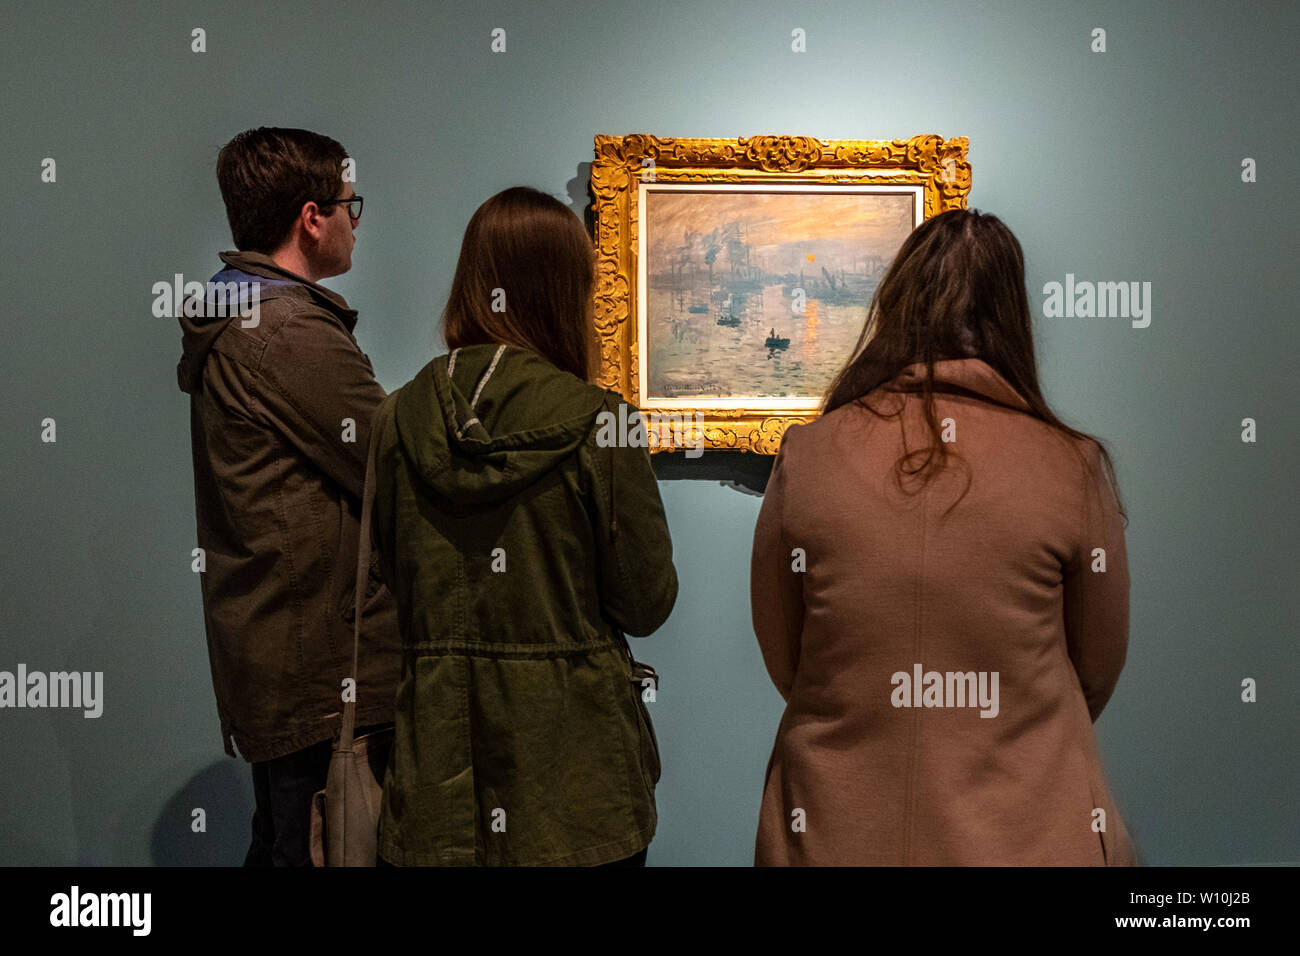 Visitors at the Claude Monet exhibition inside The National Gallery of Australia in Canberra, ACT, Australia. It's on display from 7 June till 1 Sep. Stock Photo